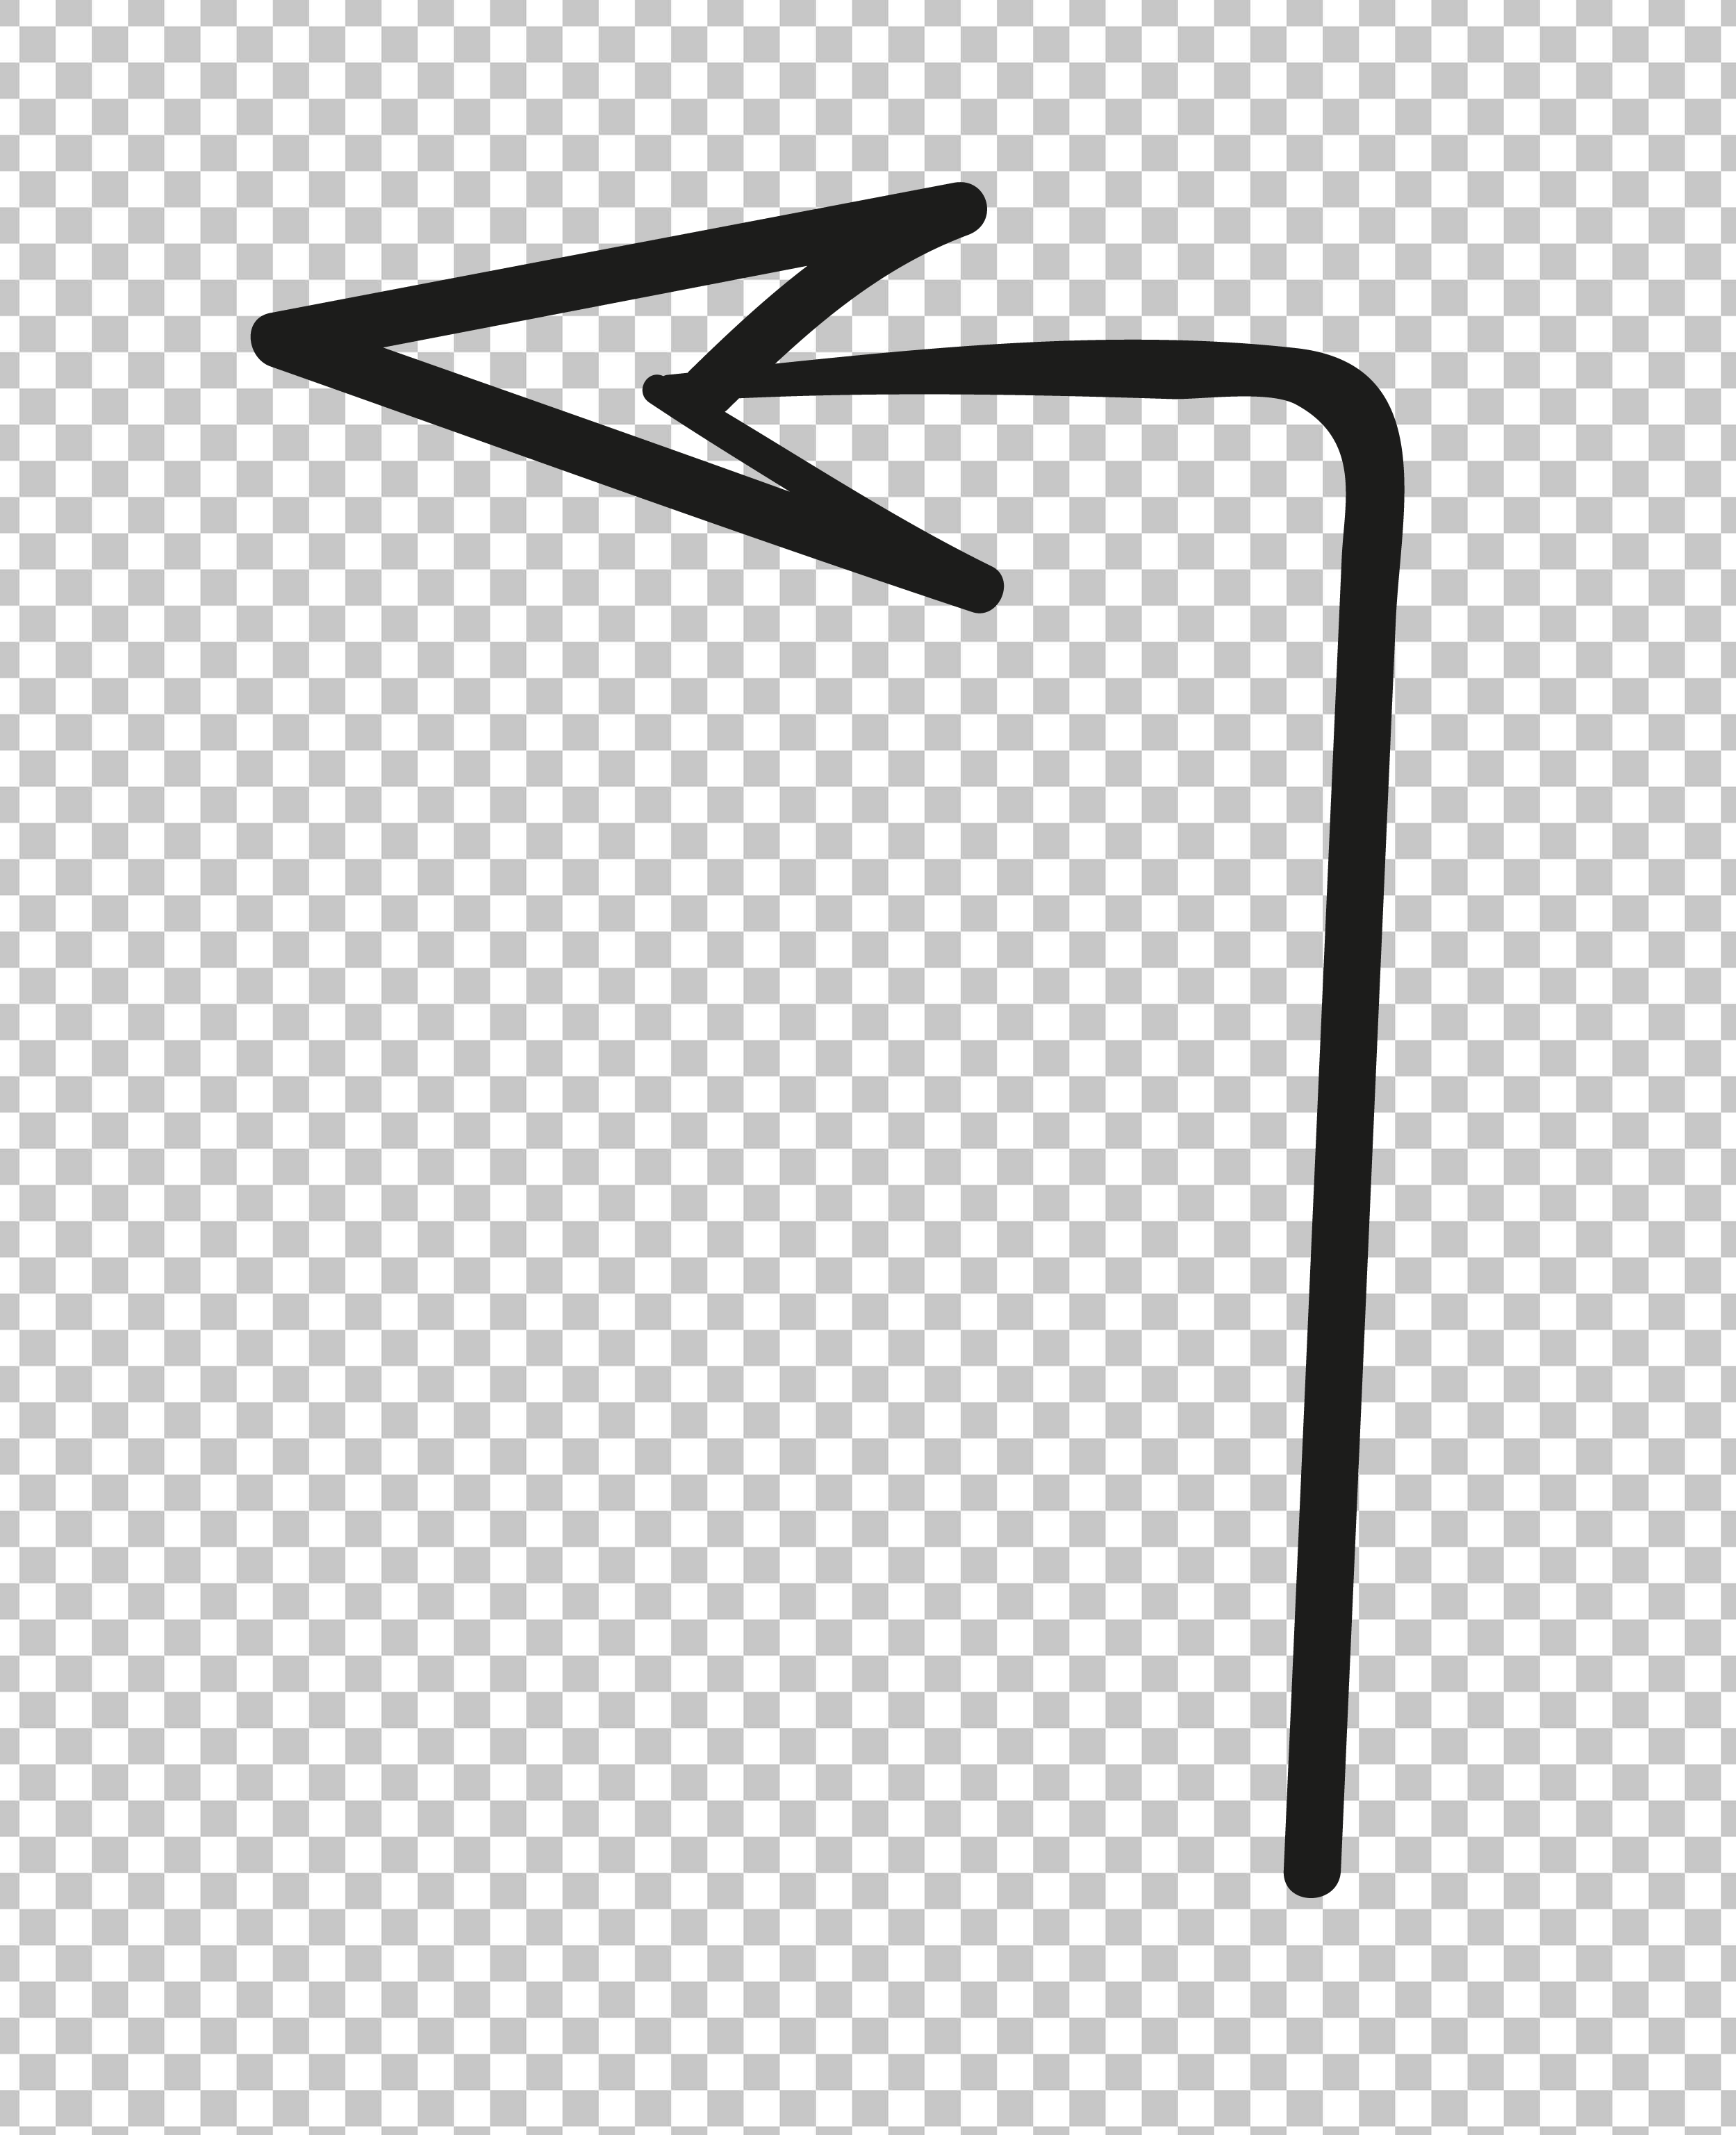 arrow pointing left png